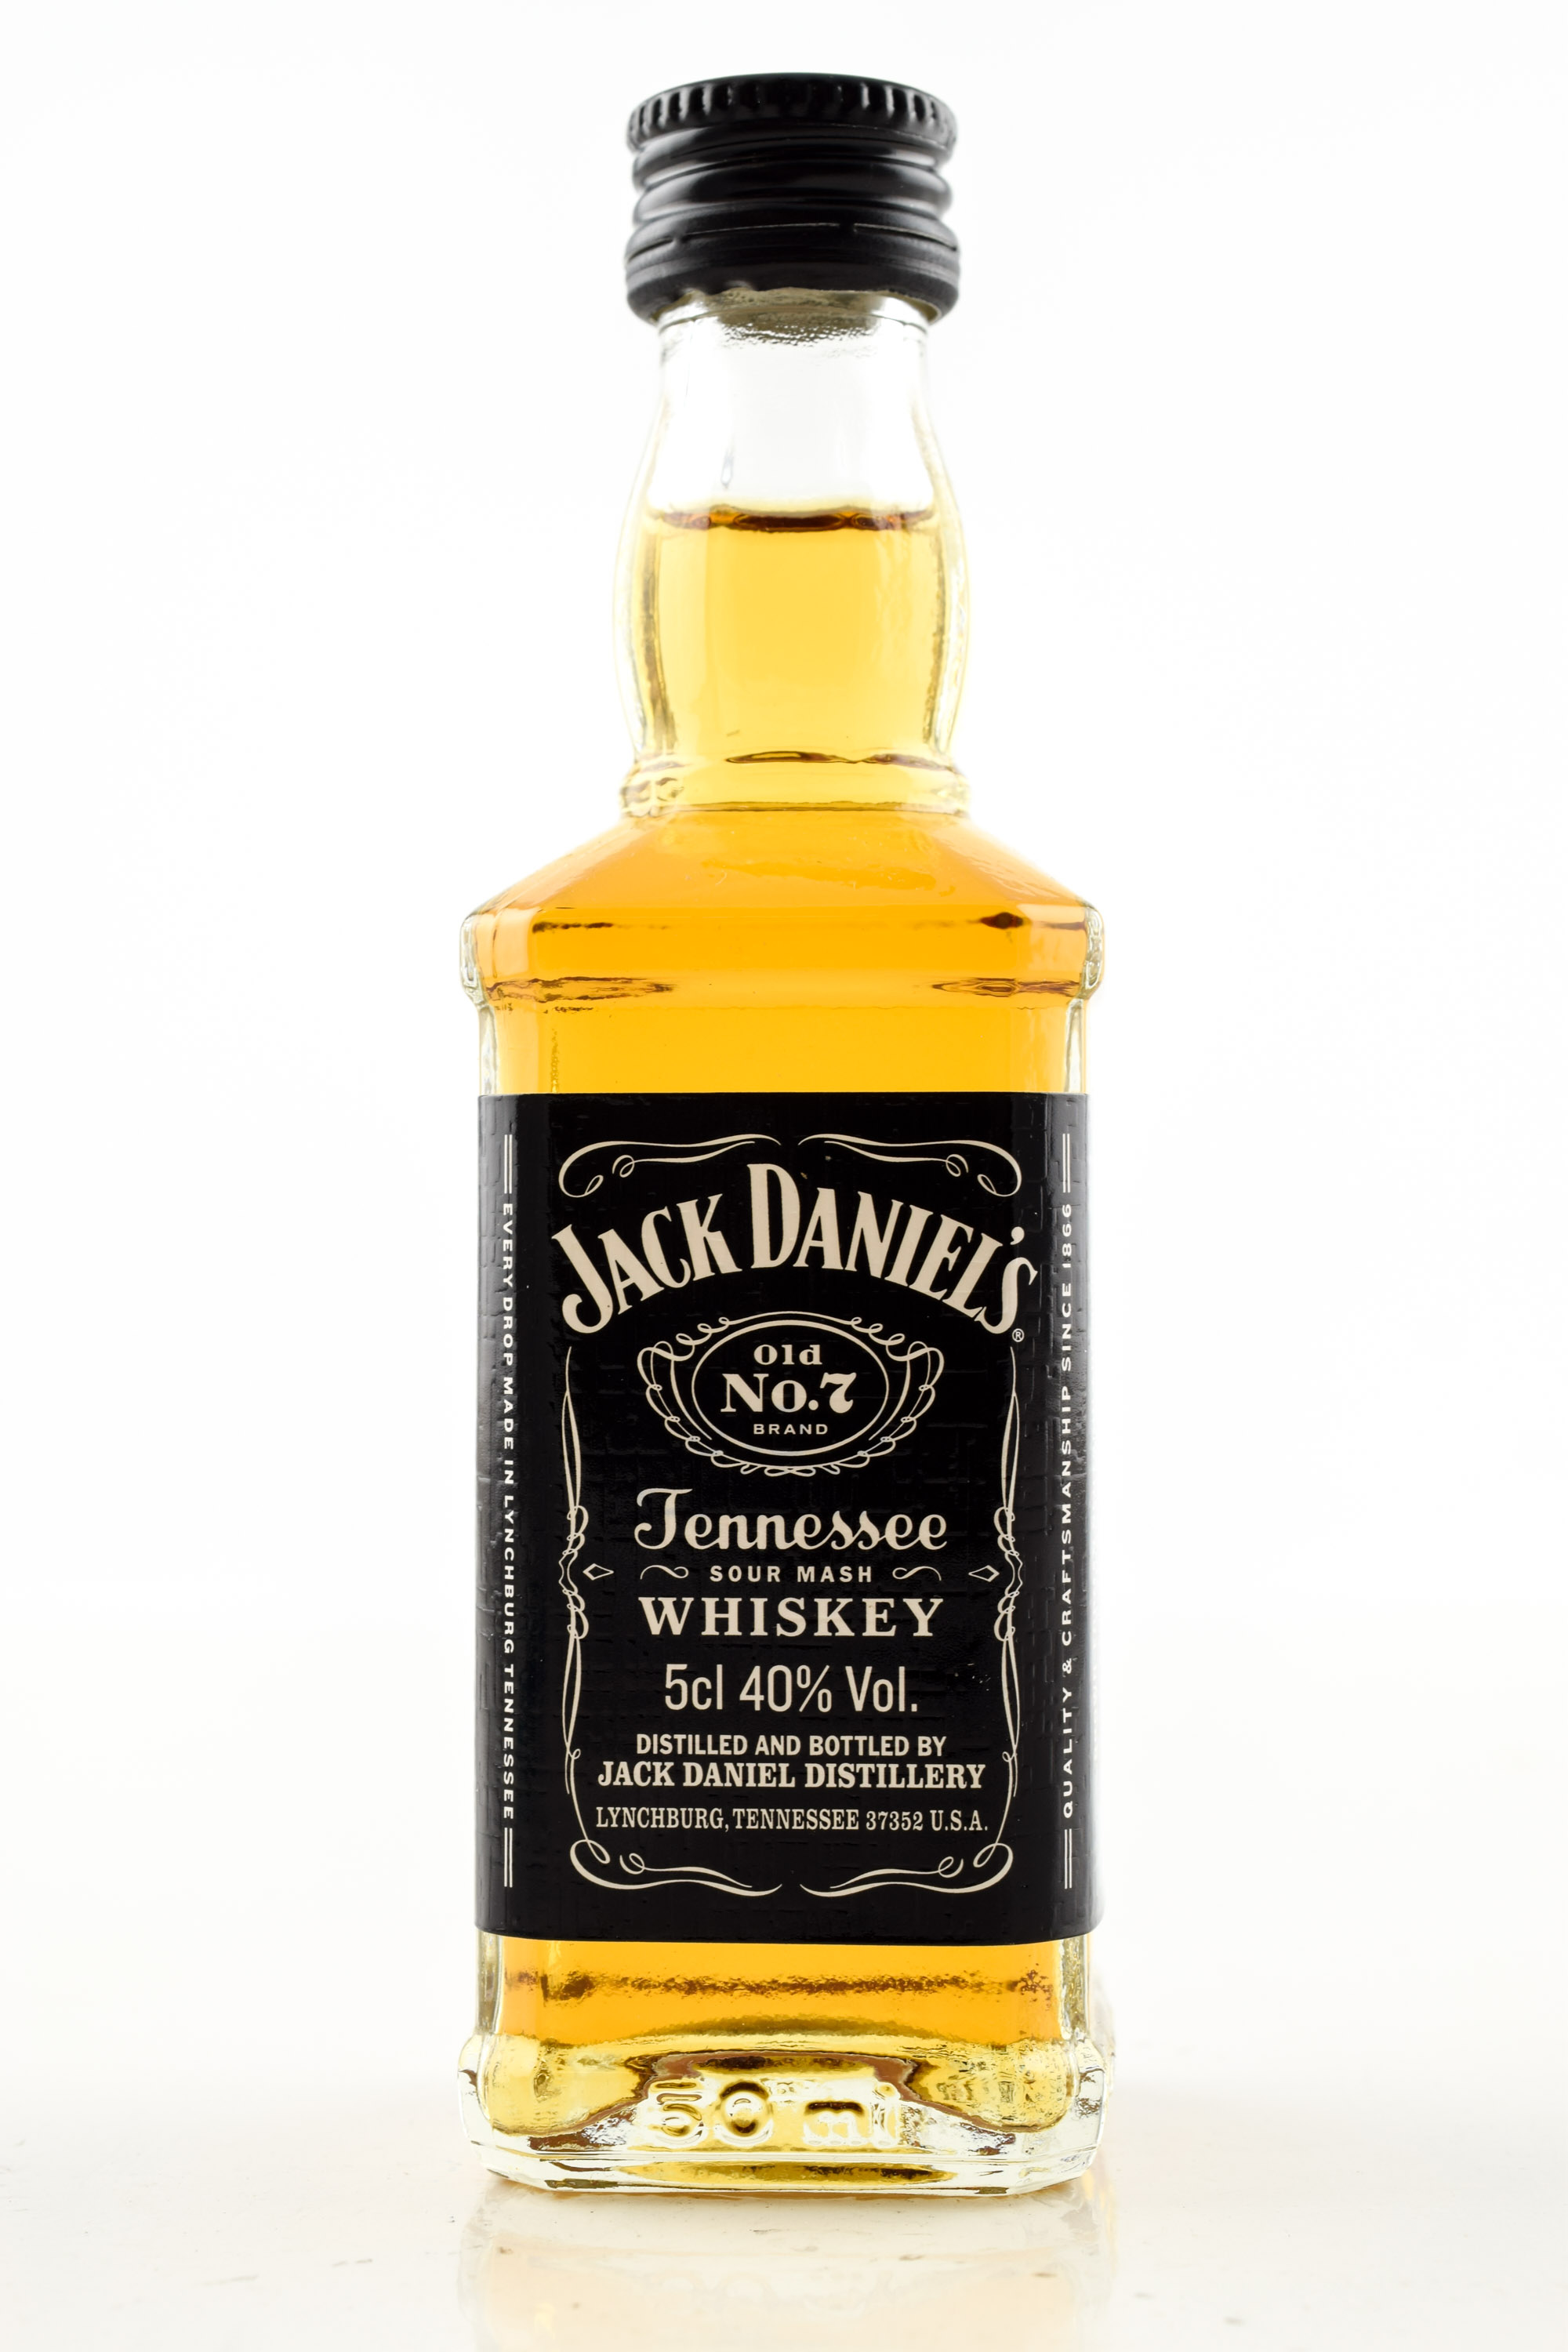 | of at of now! explore >> Jack - 7 Malts Home Whiskey Daniel\'s No. Tennessee Malts 4 Home